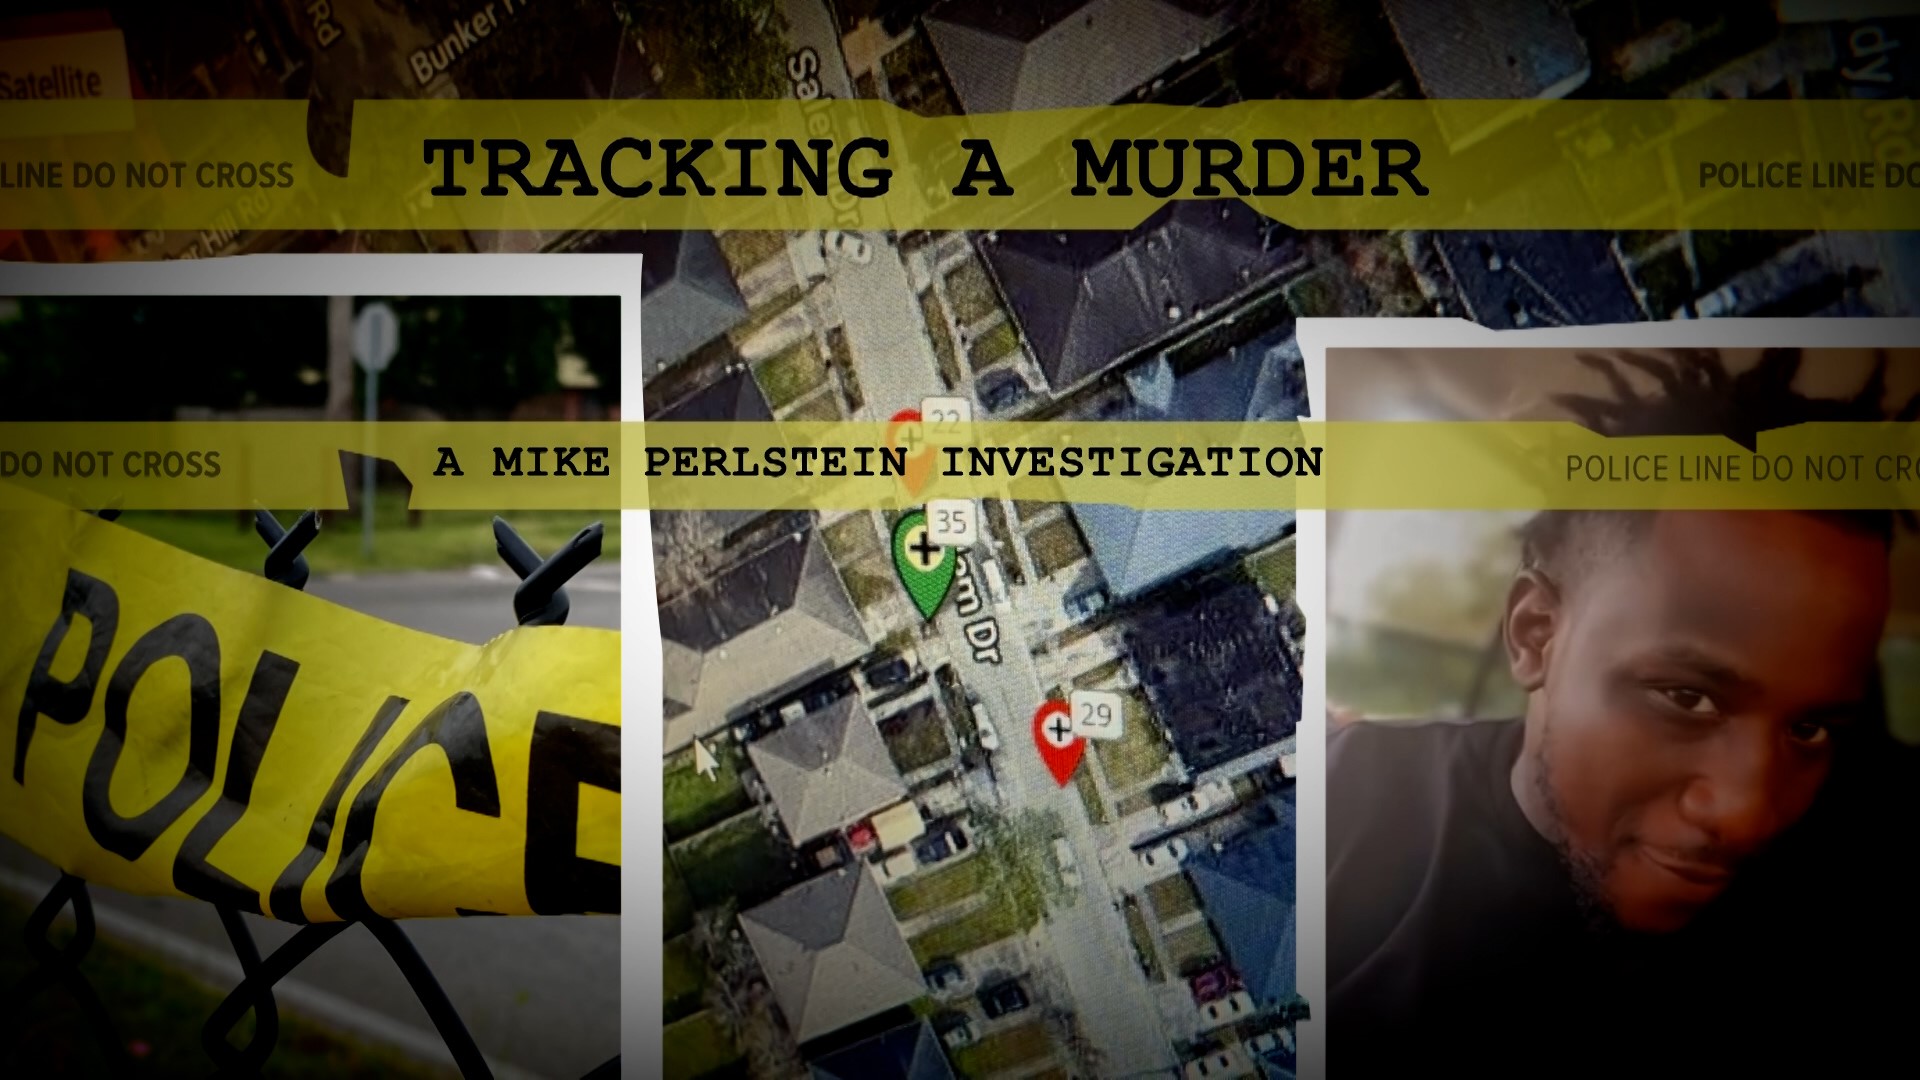 WWL Louisiana's Mike Perlstein shows how an ankle monitor's GPS signal helped identify a triple murder suspect.